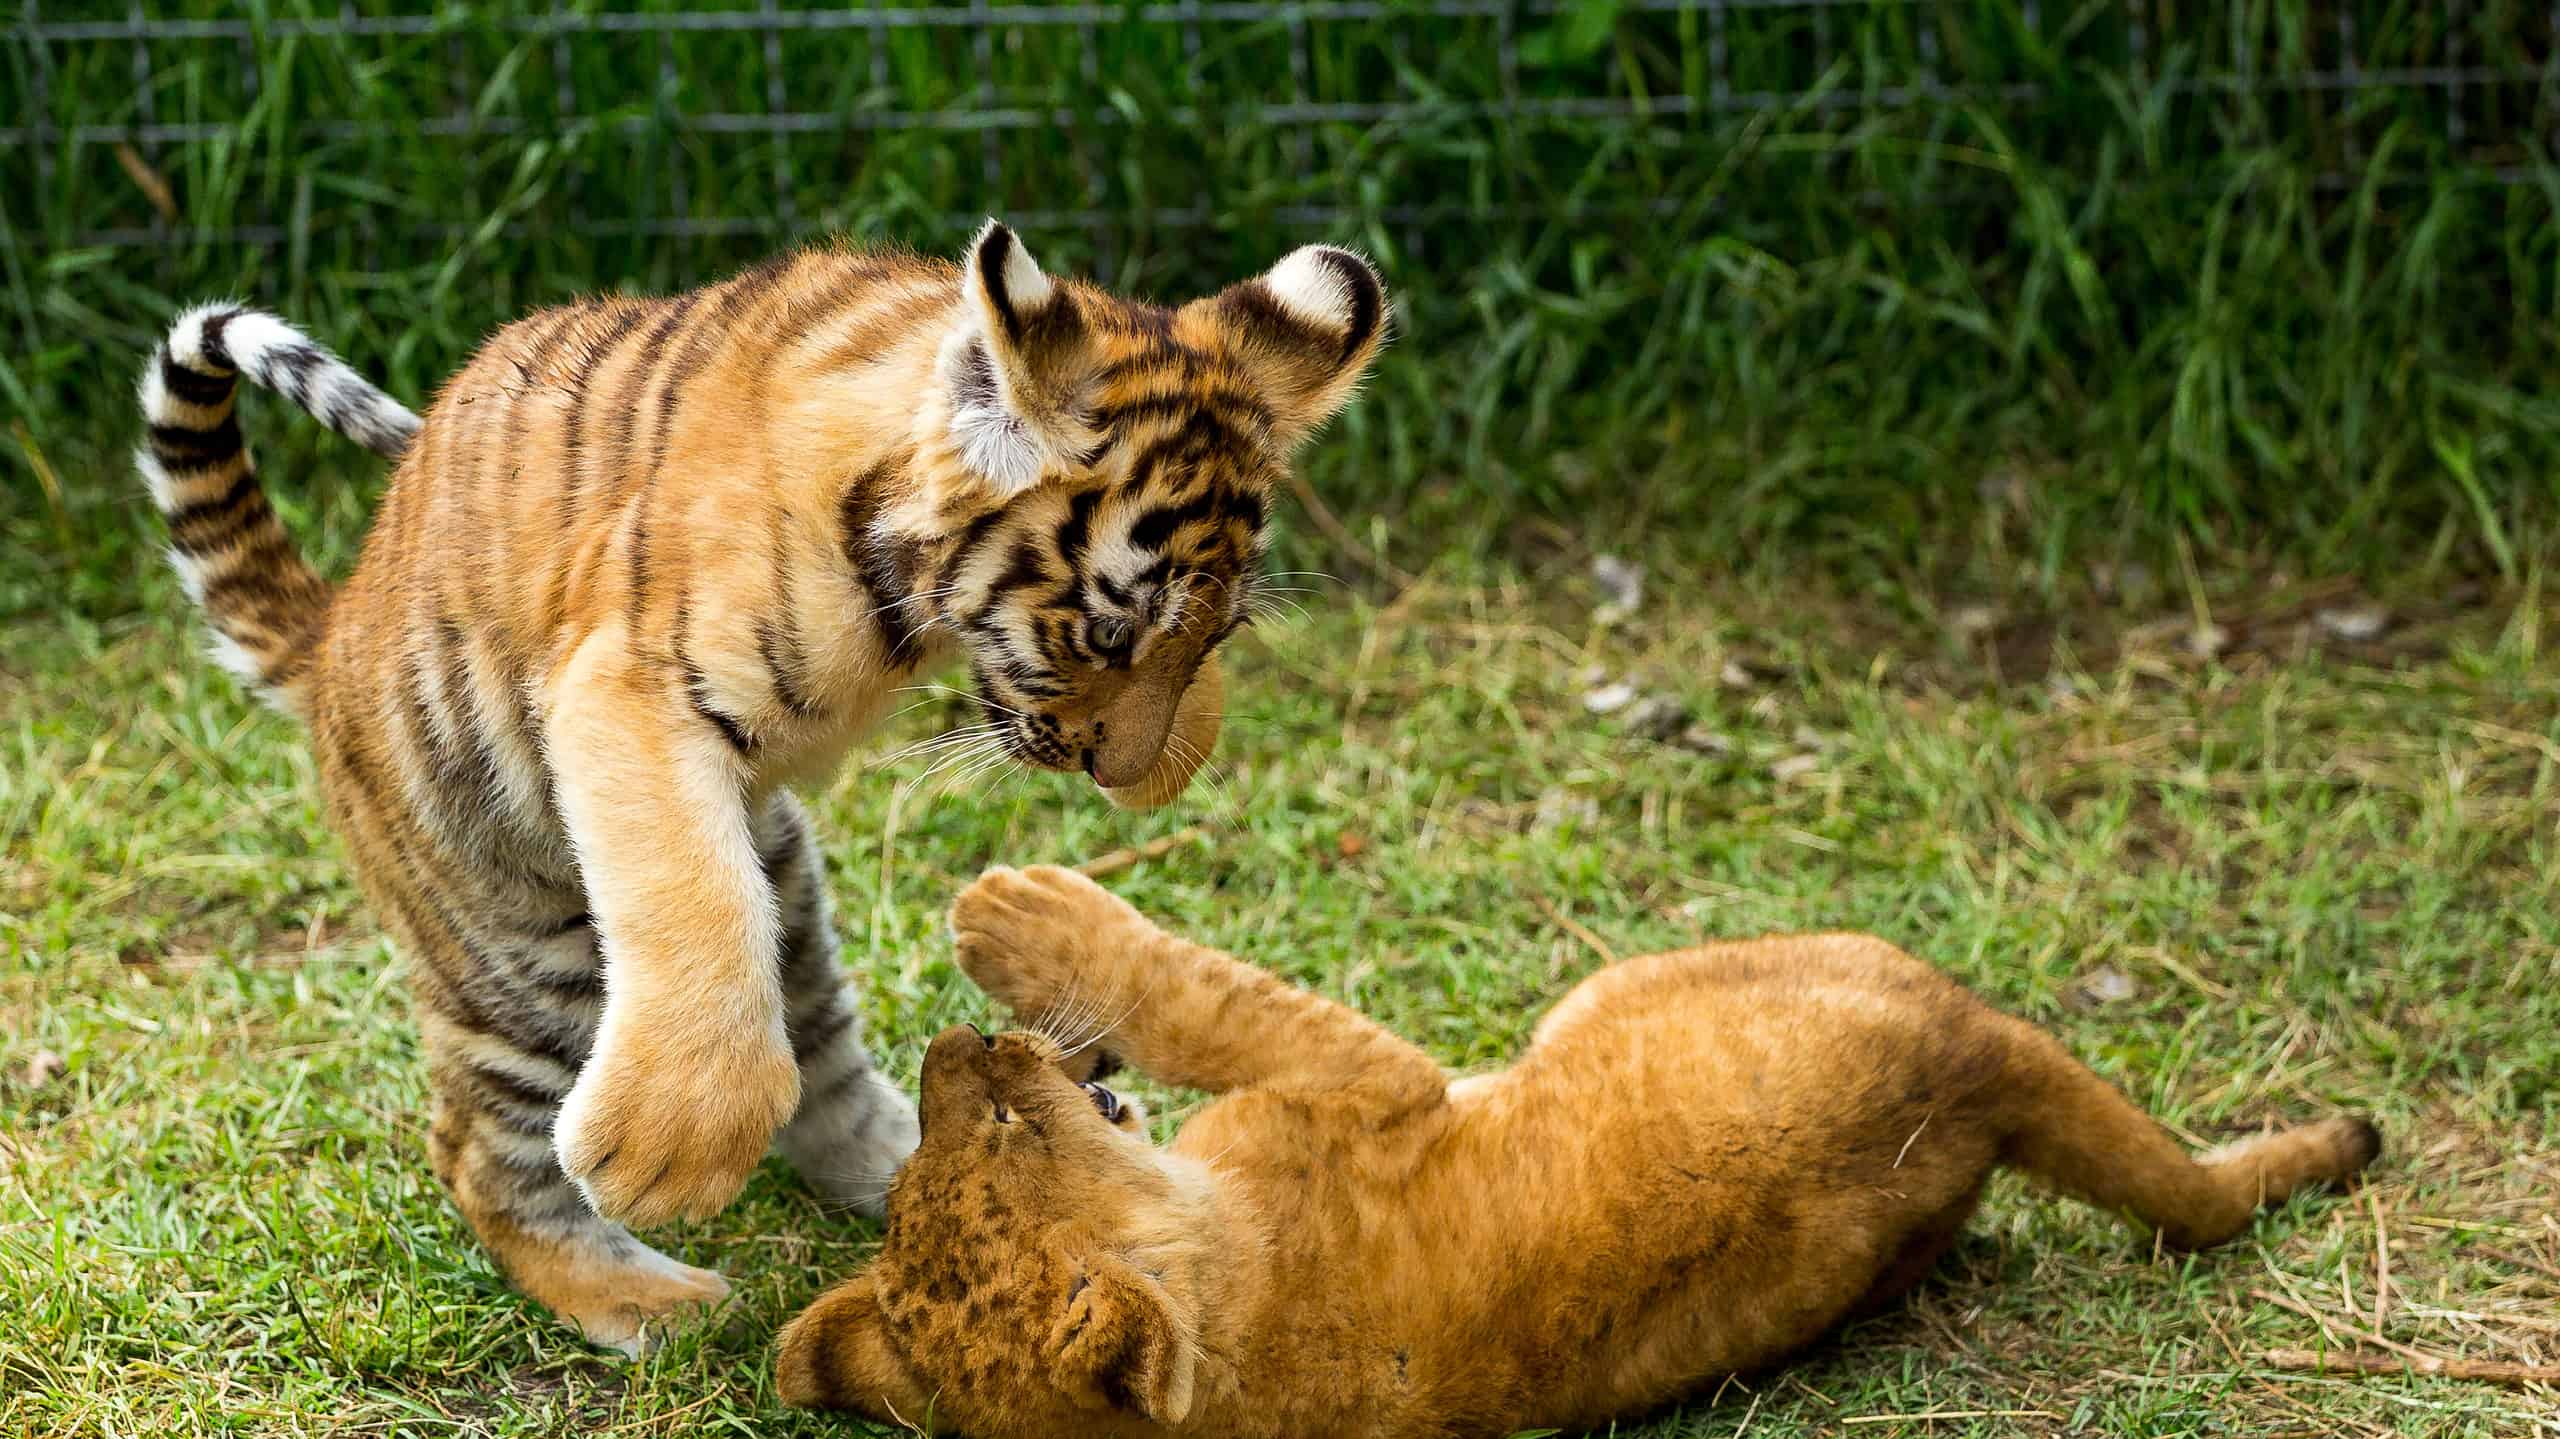 lion and tiger fight for food